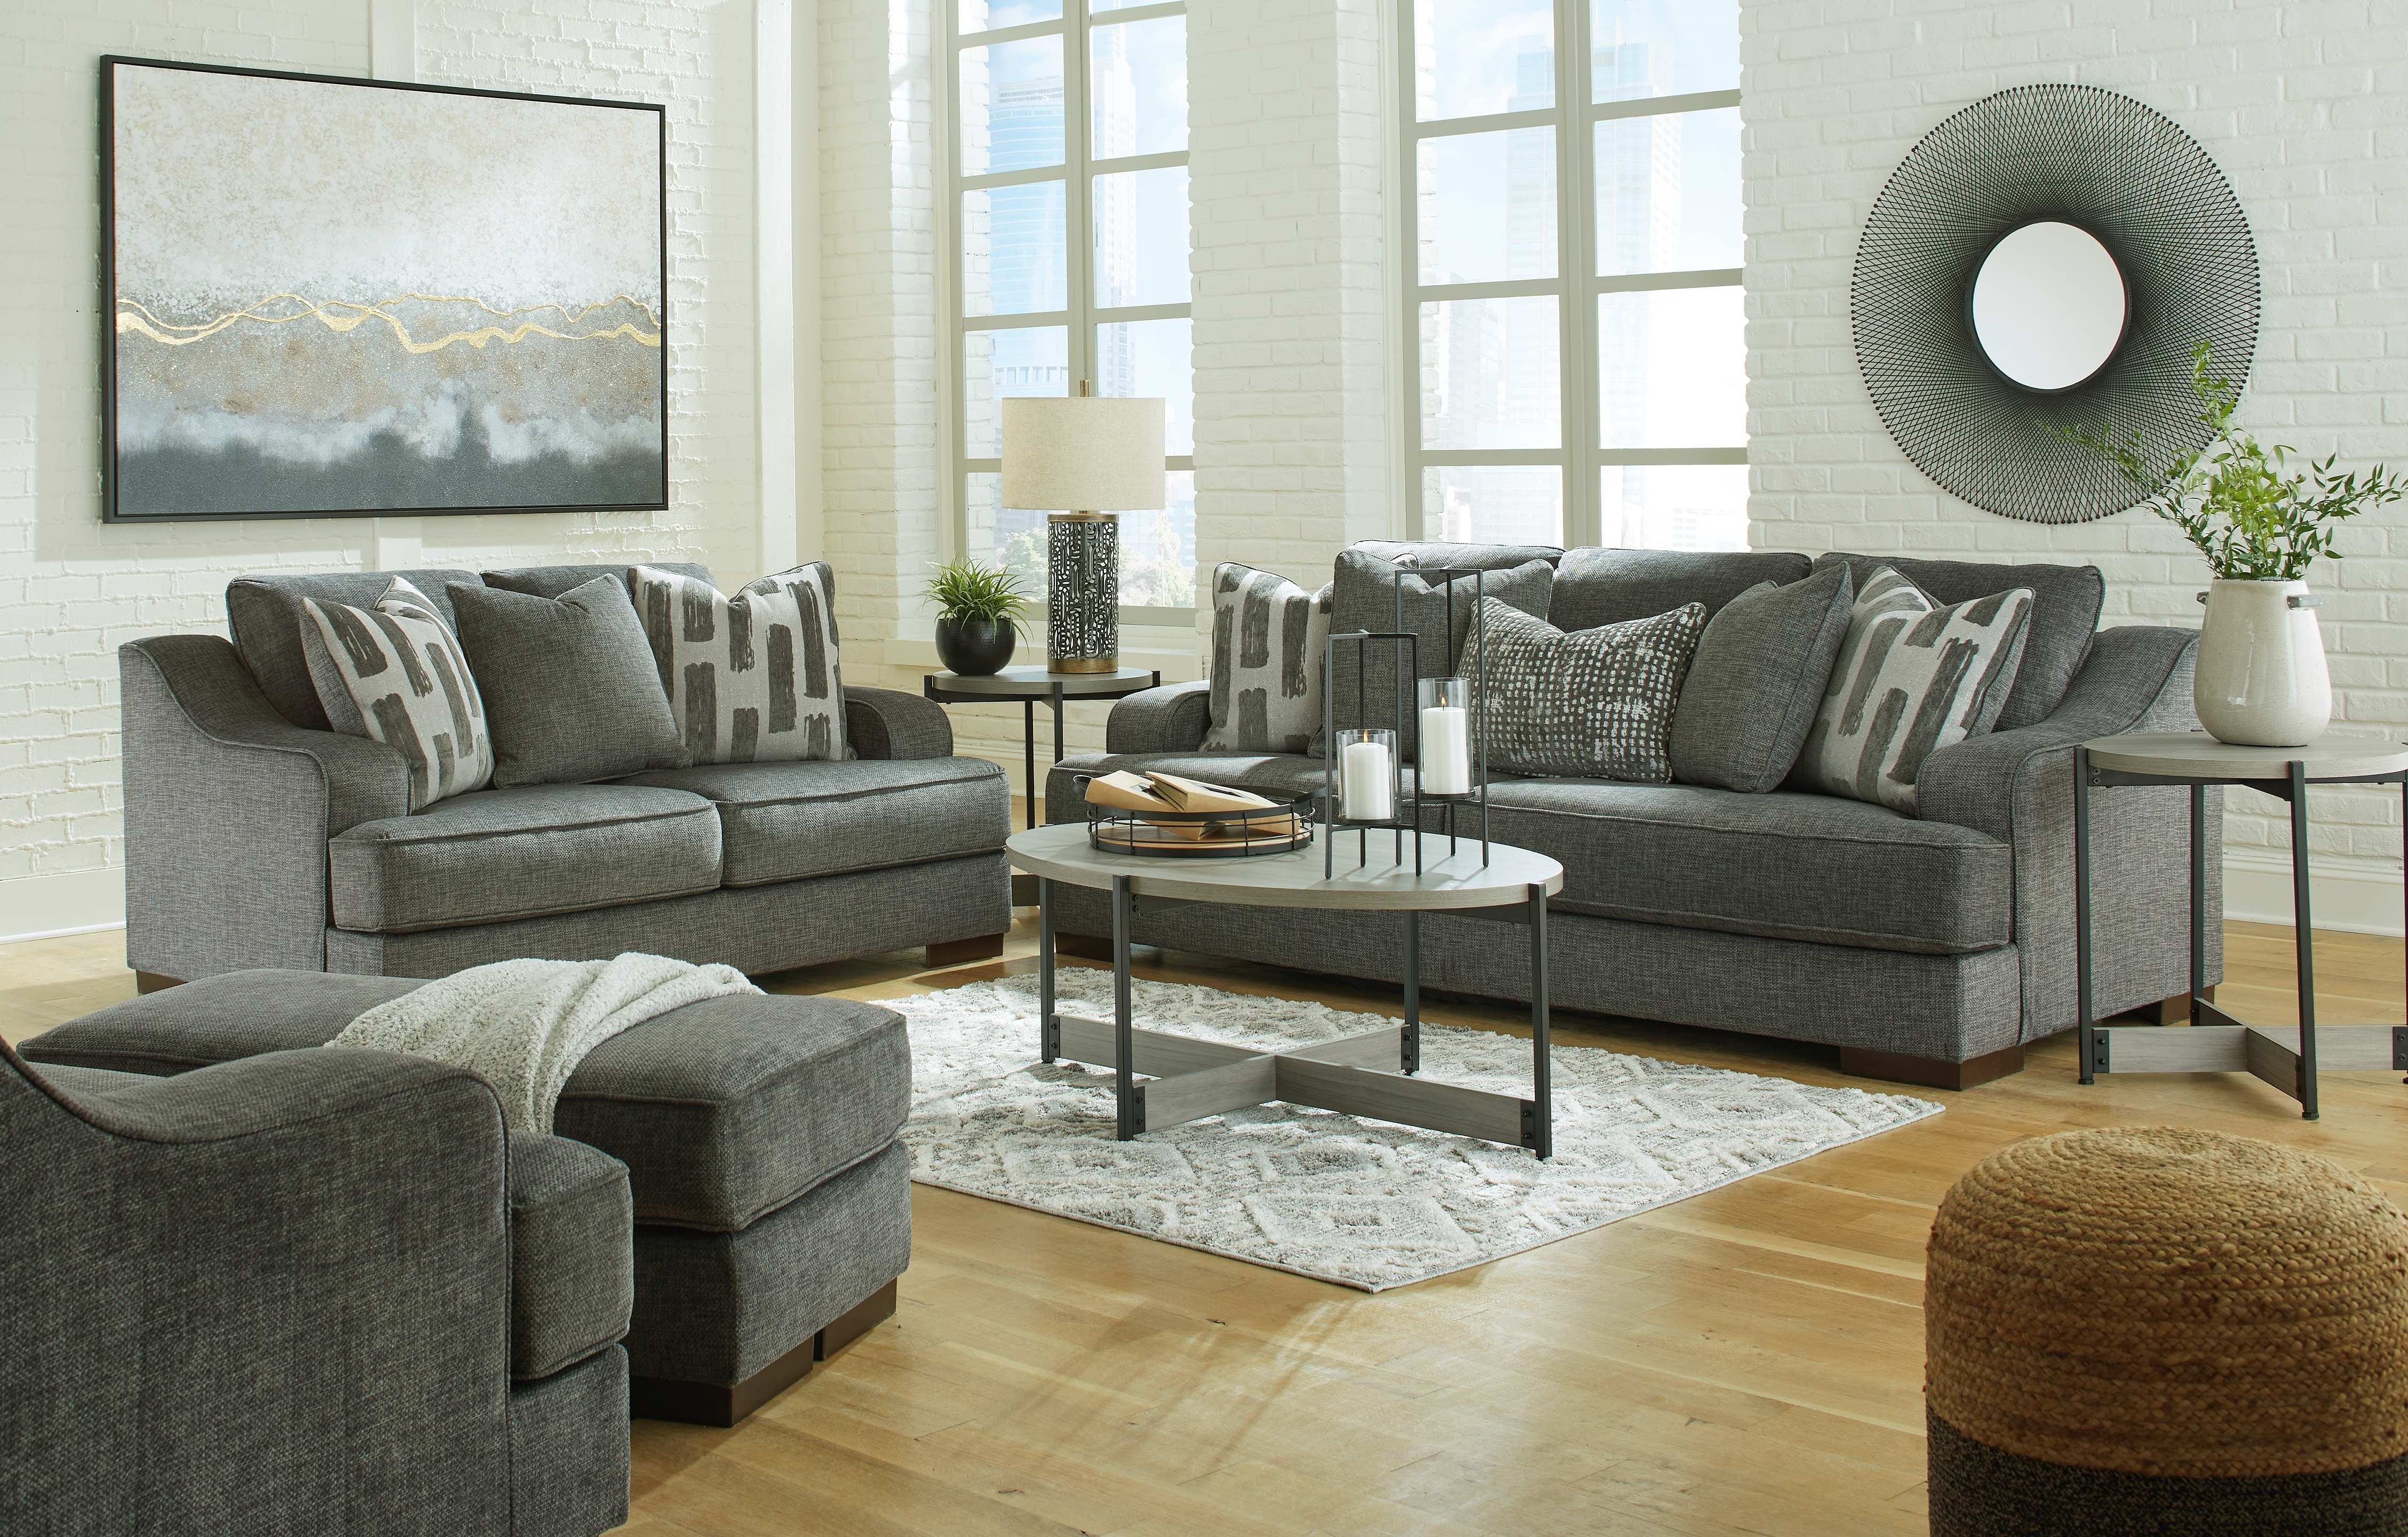 Living Room Sets Ashley 4 Piece Sofa Loveseat Chair And Ottoman Set 50010 38 35 23 14 At Istyle Furniture